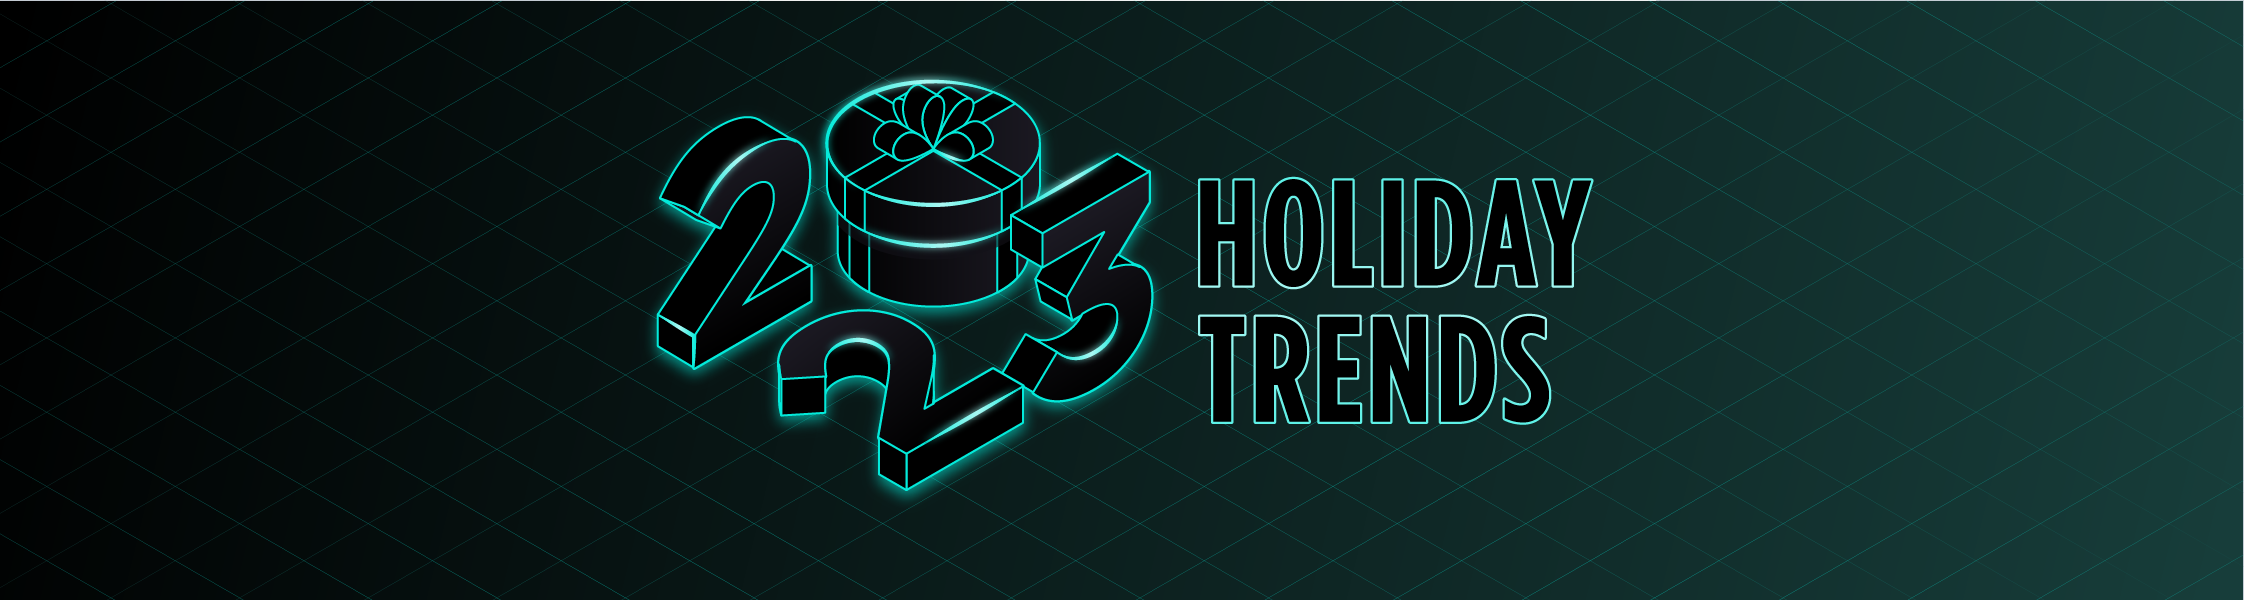 Top Trends and Predictions for the 2023 Holiday Shopping Season